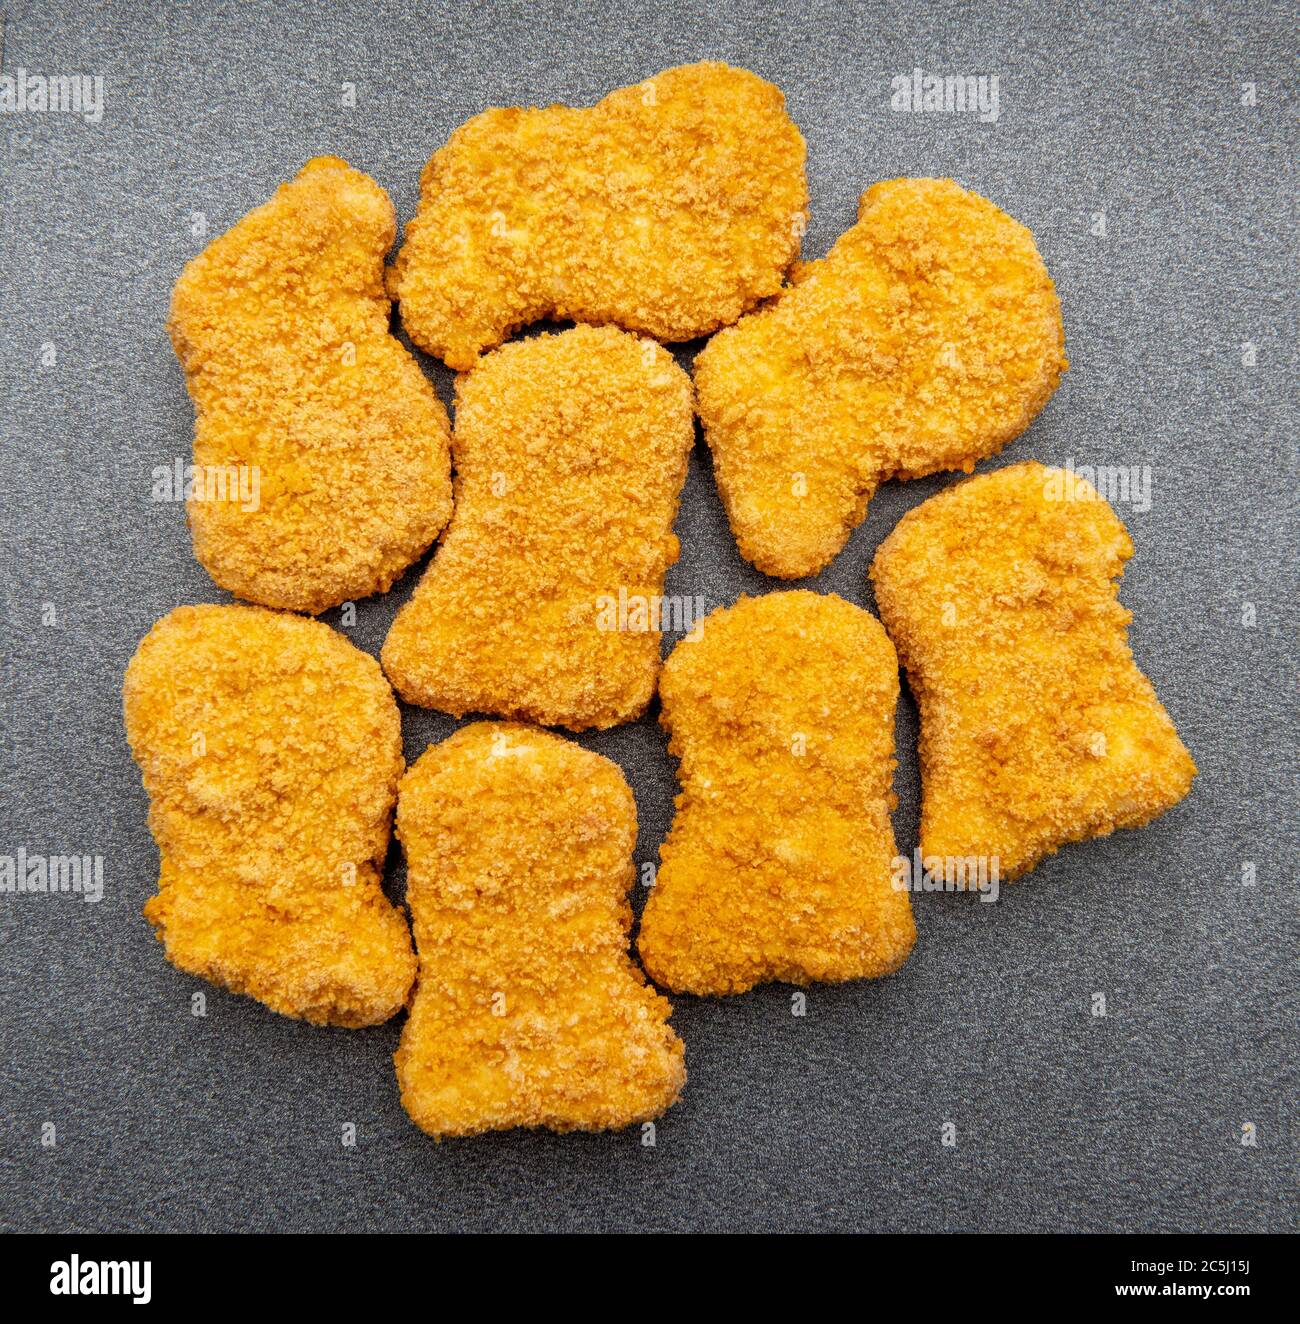 Chicken nuggets on a grey metal background Stock Photo